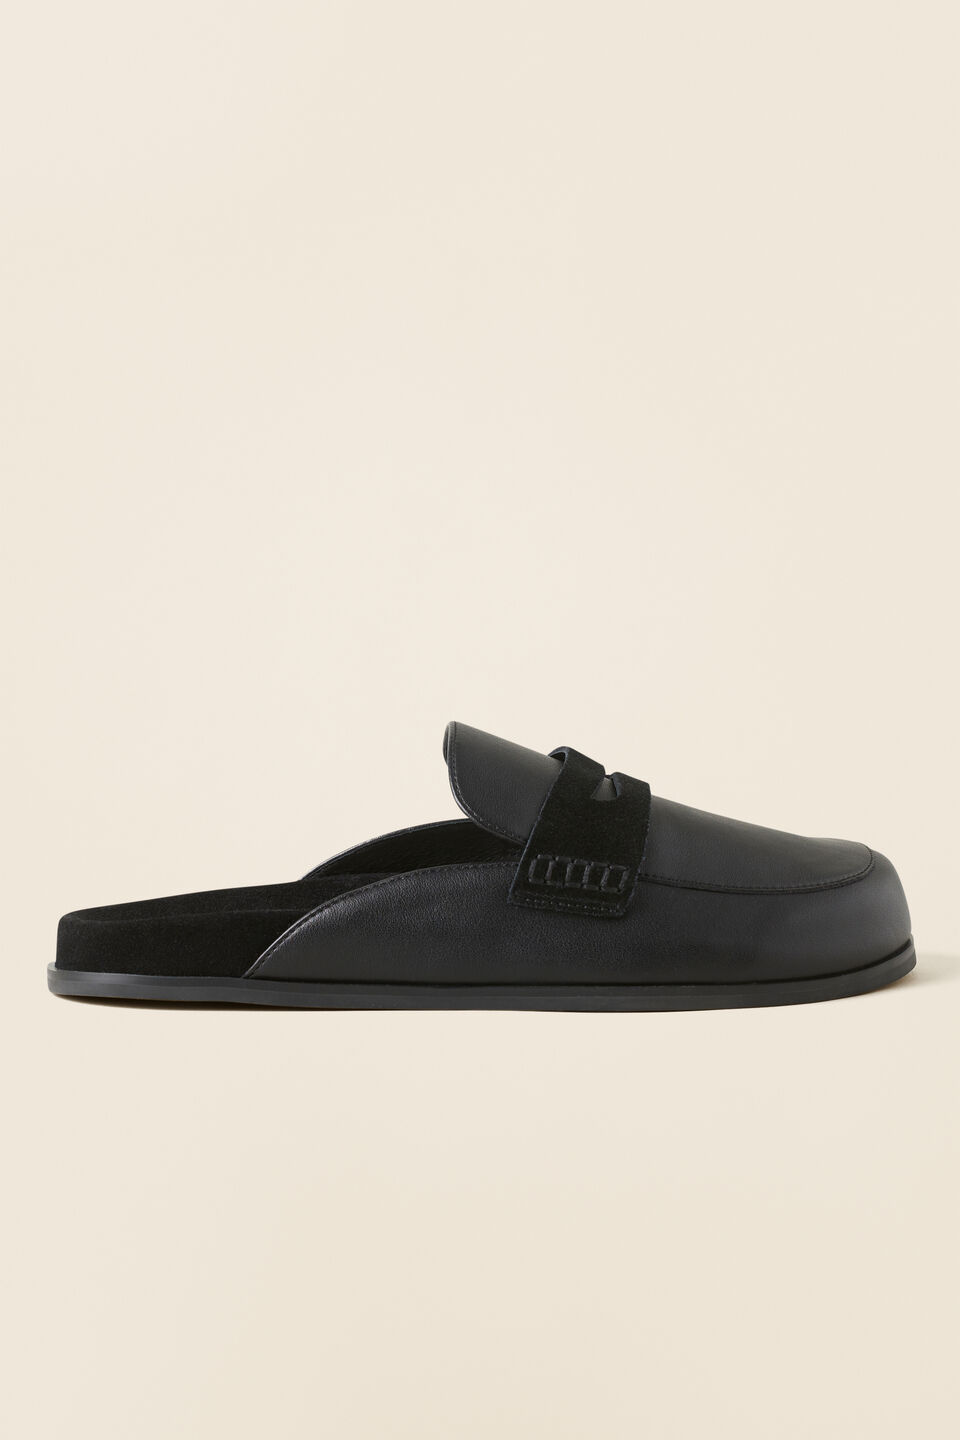 Willow Leather Loafer Mule  Black  hi-res